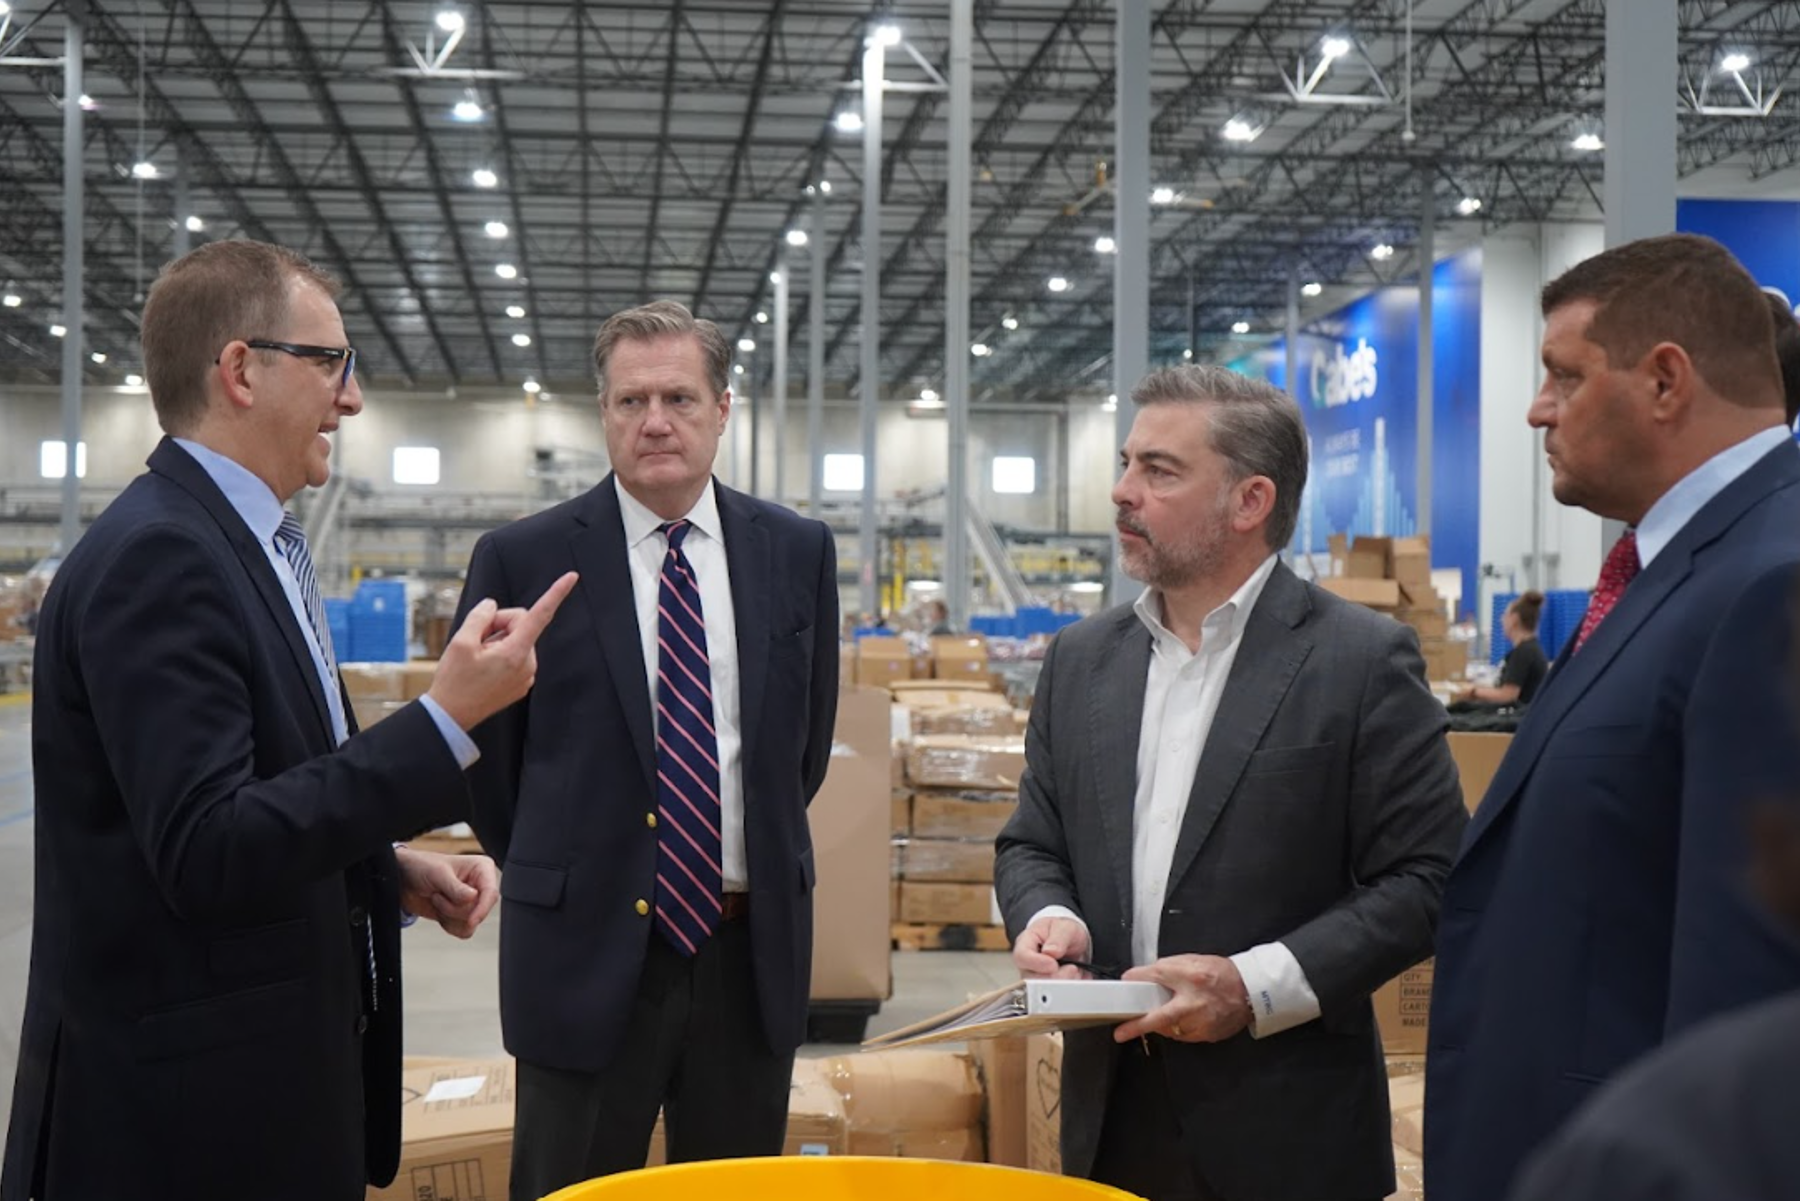 Reps. Mike Turner and Mike Carey tour Gabe's Distribution Center